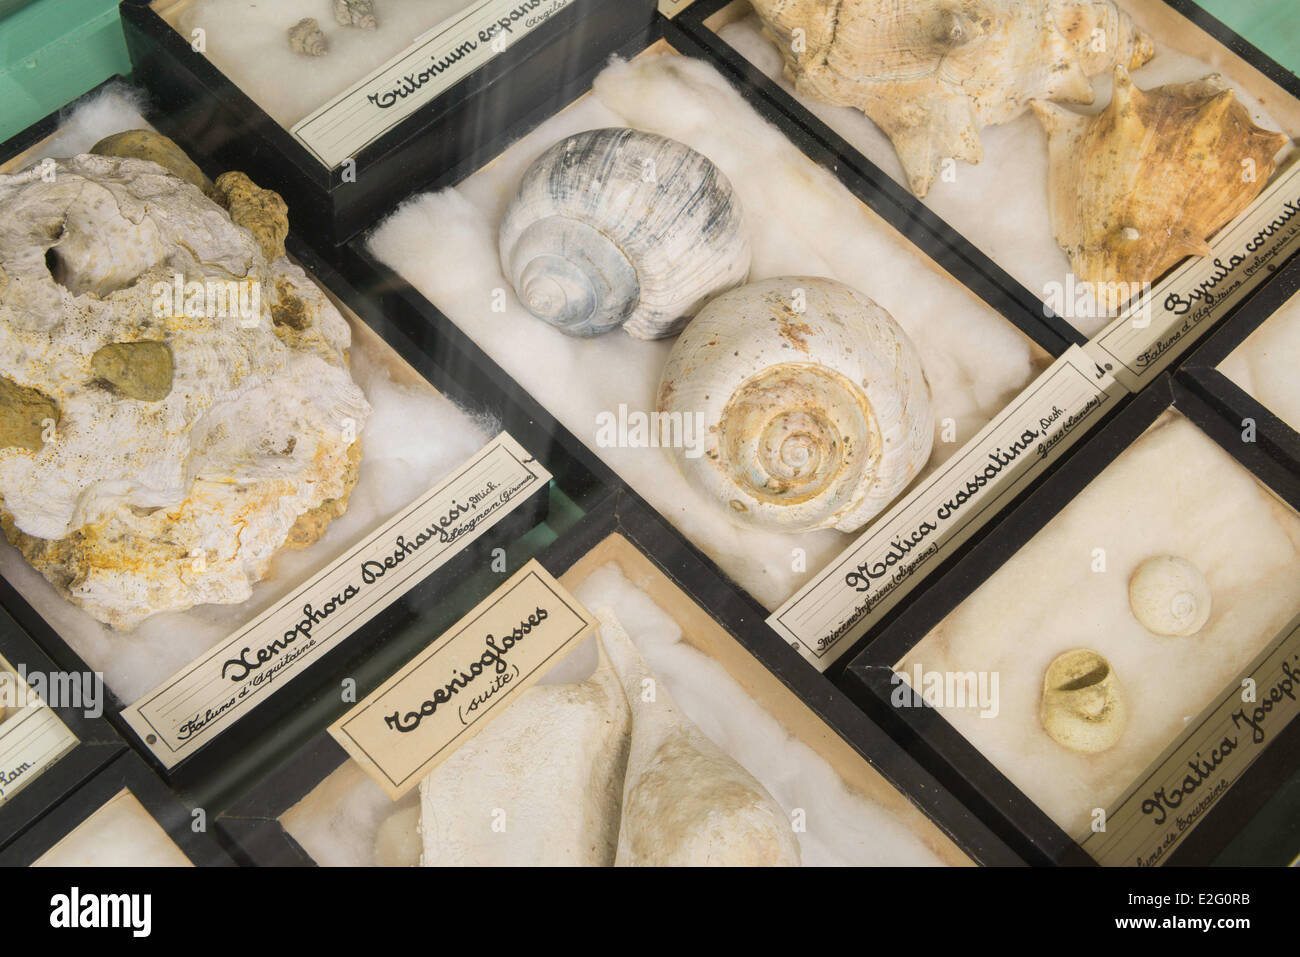 France Seine Maritime Rouen Museum of Natural History paleontology room Stock Photo